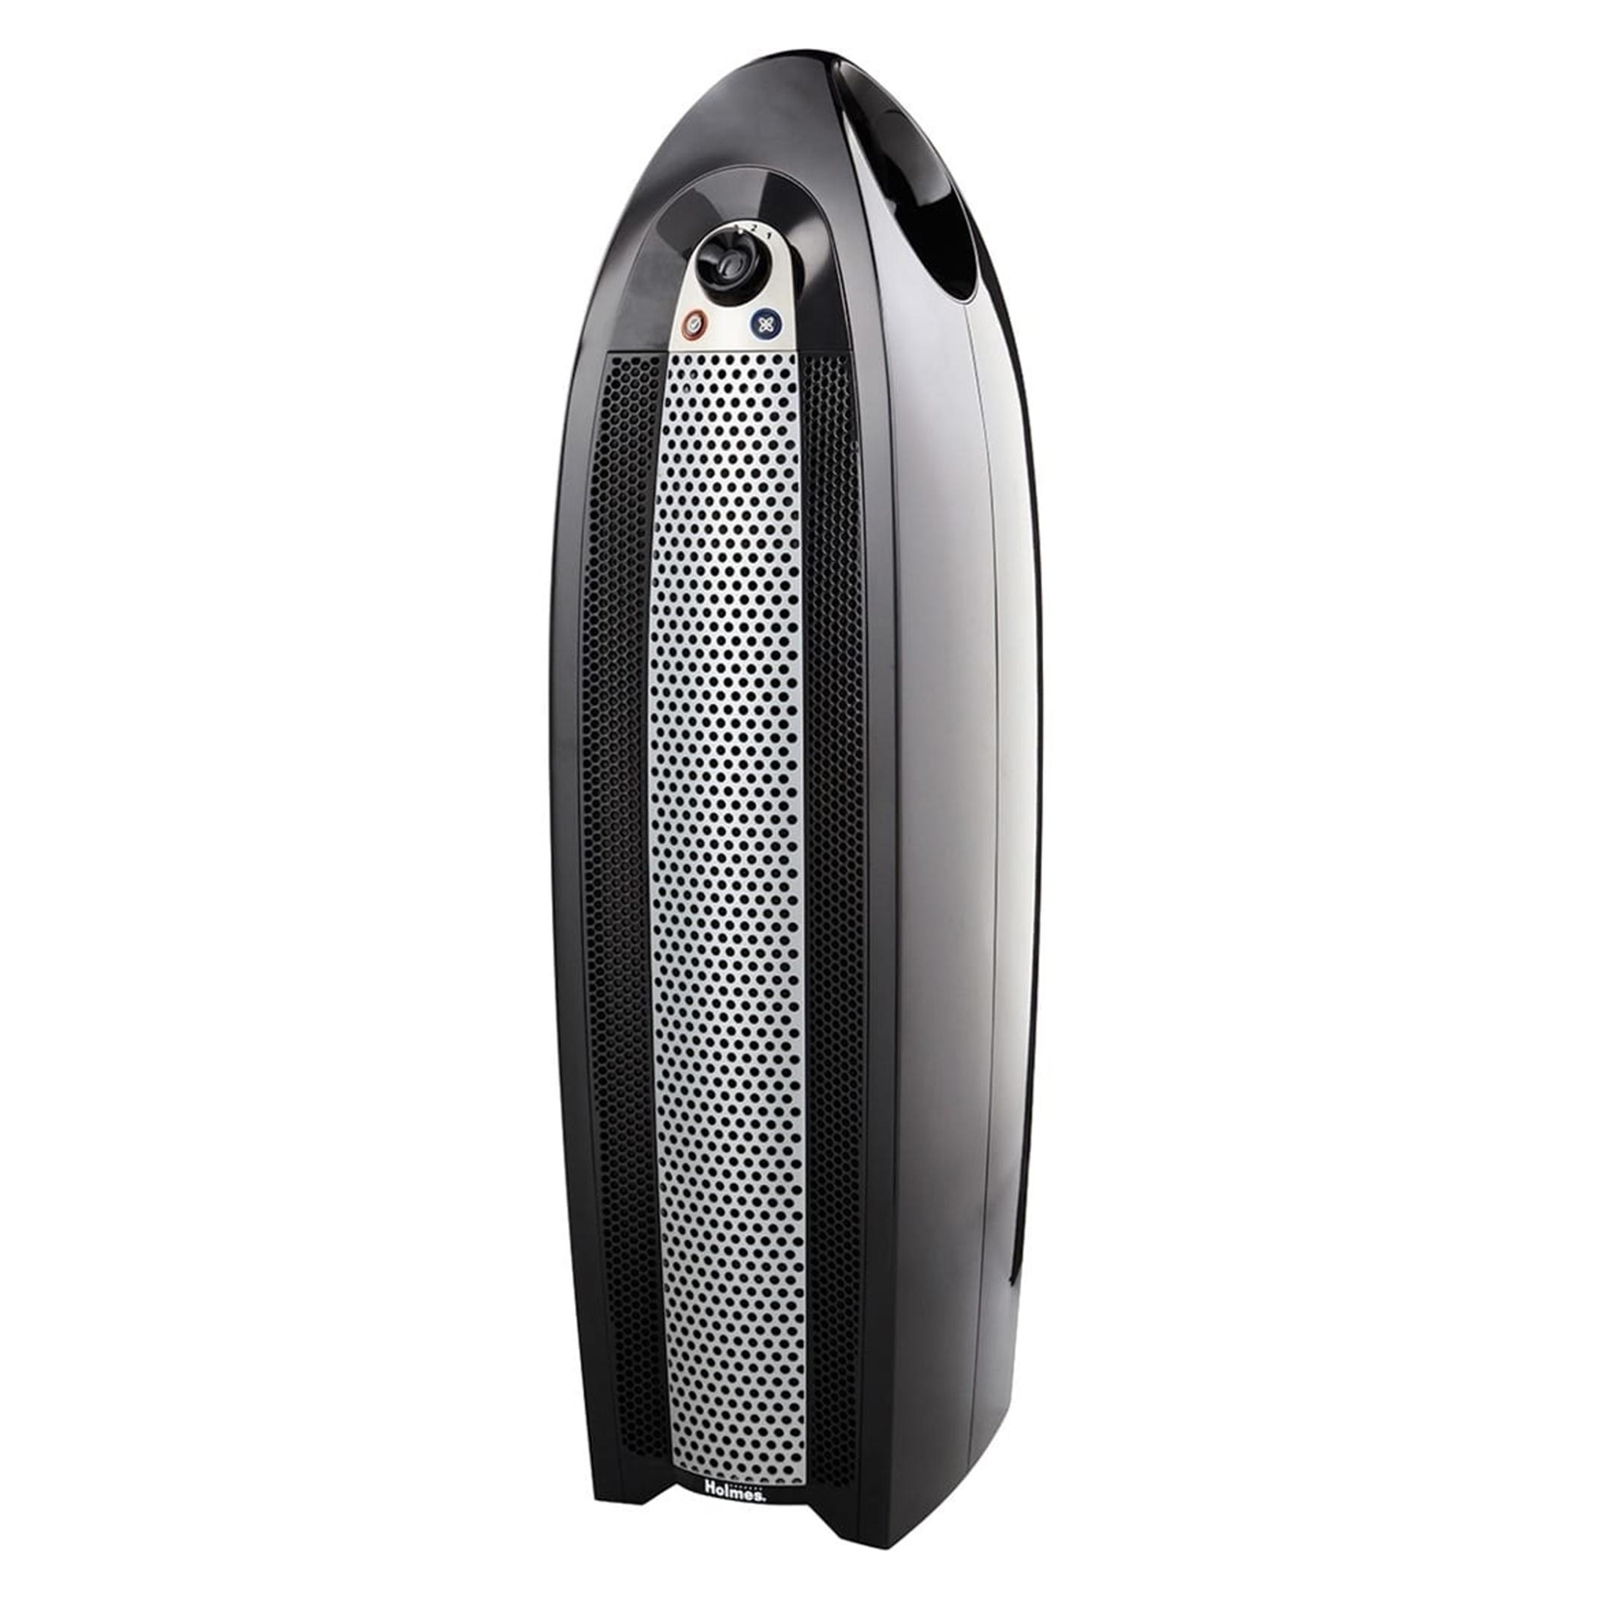 Holmes HAP9422-UA 28" HEPA-Type Tower Air Purifier with Filter Check Indicator - Black